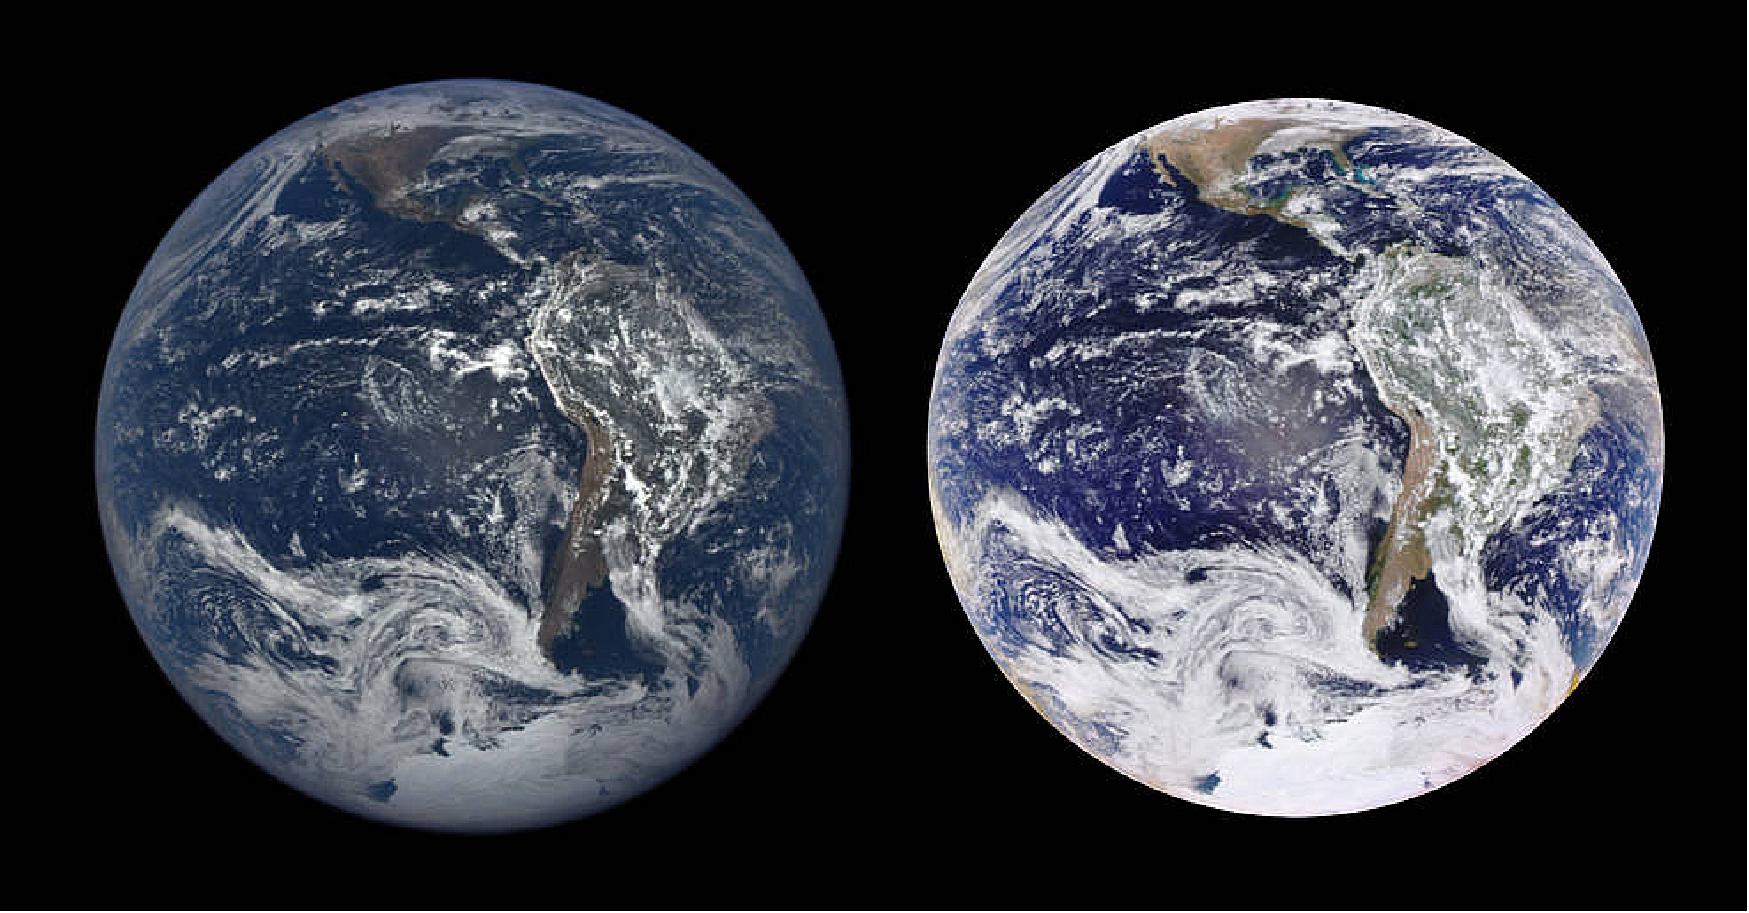 Figure 31: An EPIC Natural Color image (left) and an Enhanced Color image (right) of the Earth, acquired on January 26, 2017 (image cedit: NASA/NOAA)